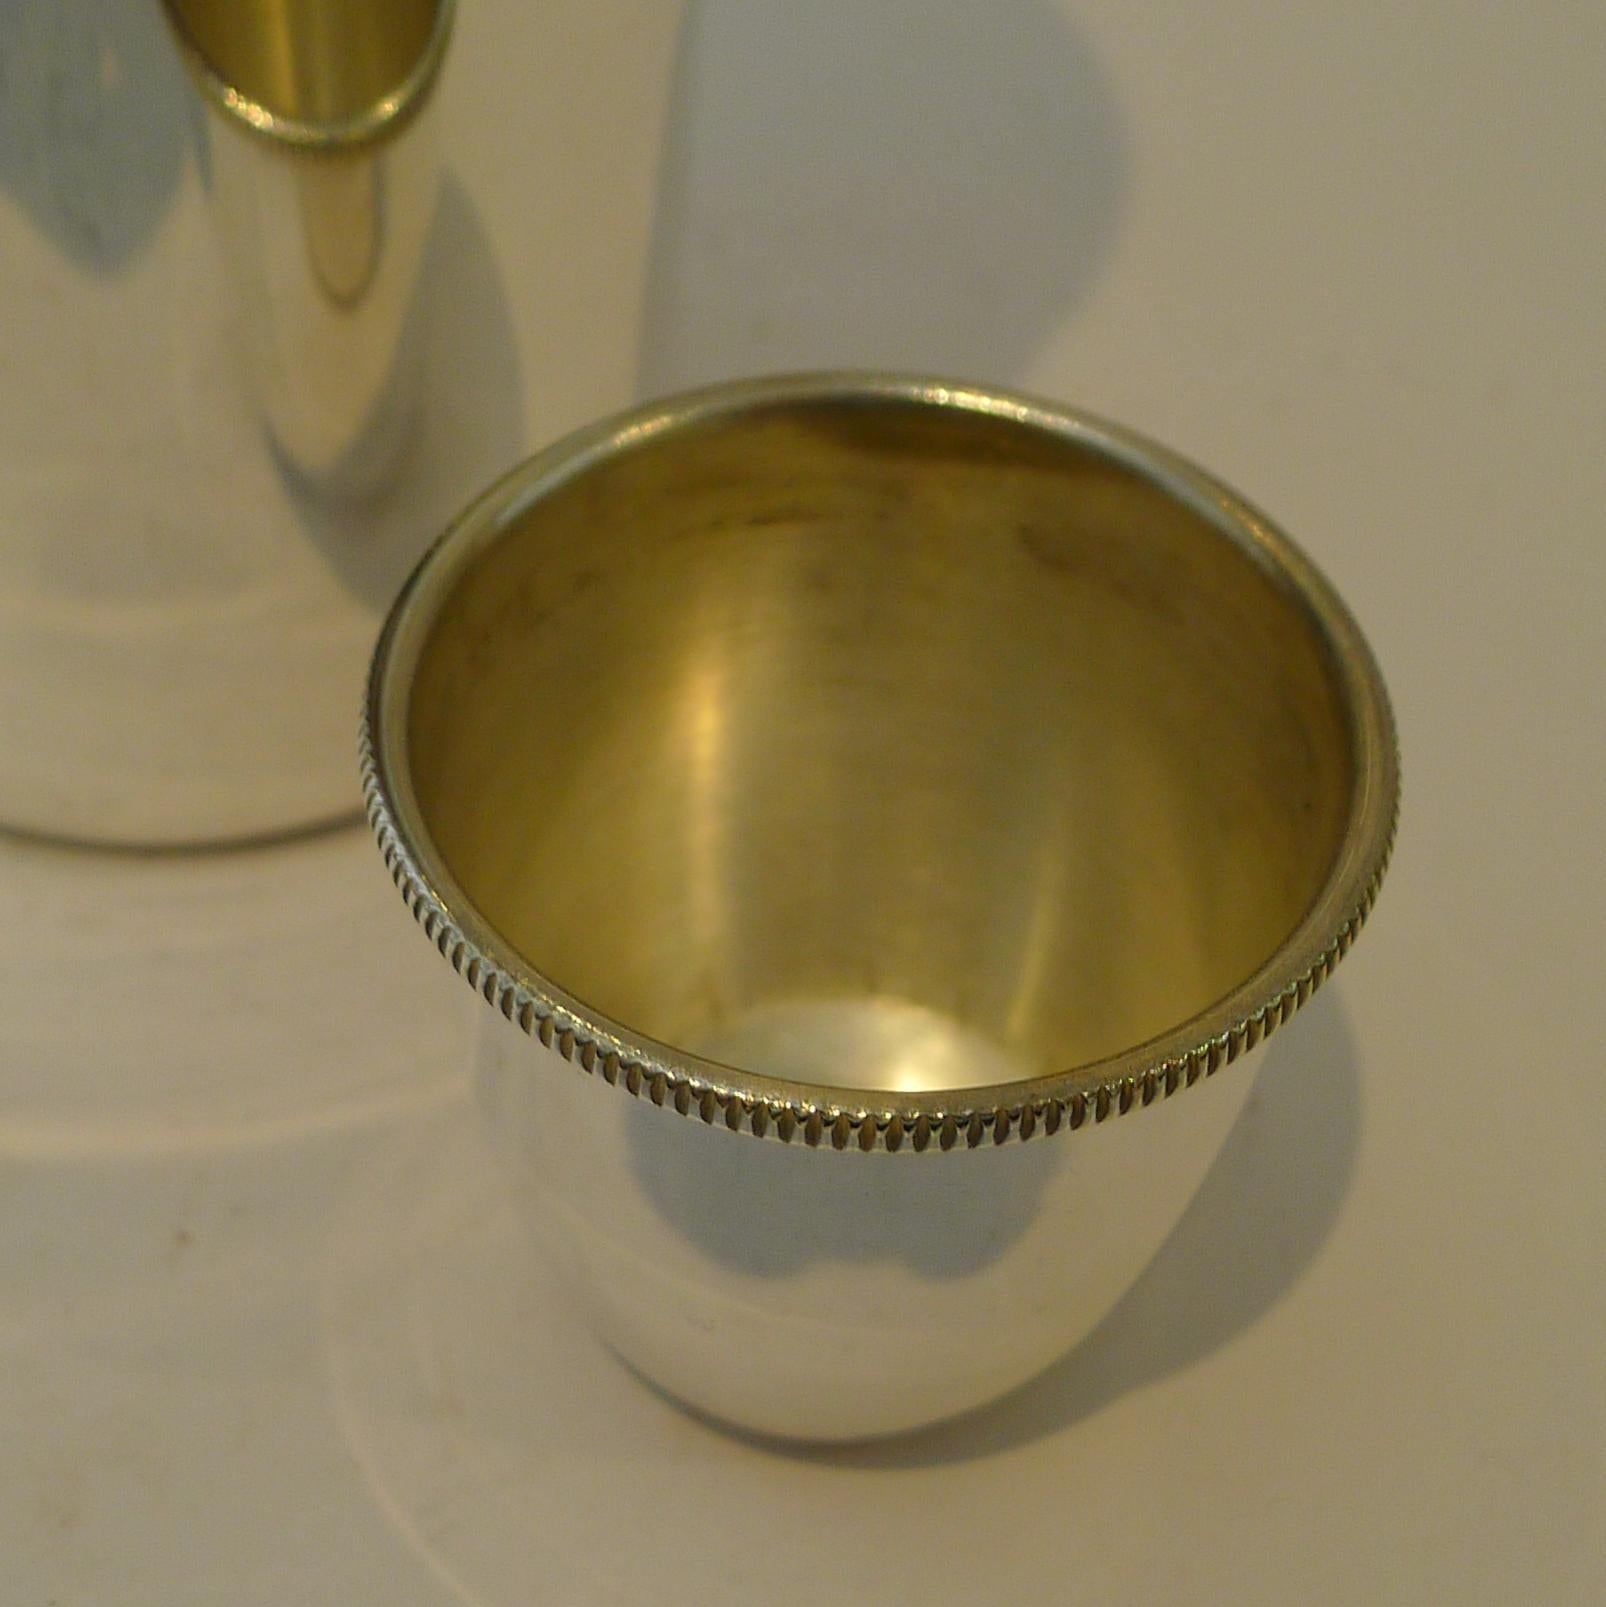 Italian Art Deco Silver and Gold Plated Menu / Recipe Cocktail Shaker 1